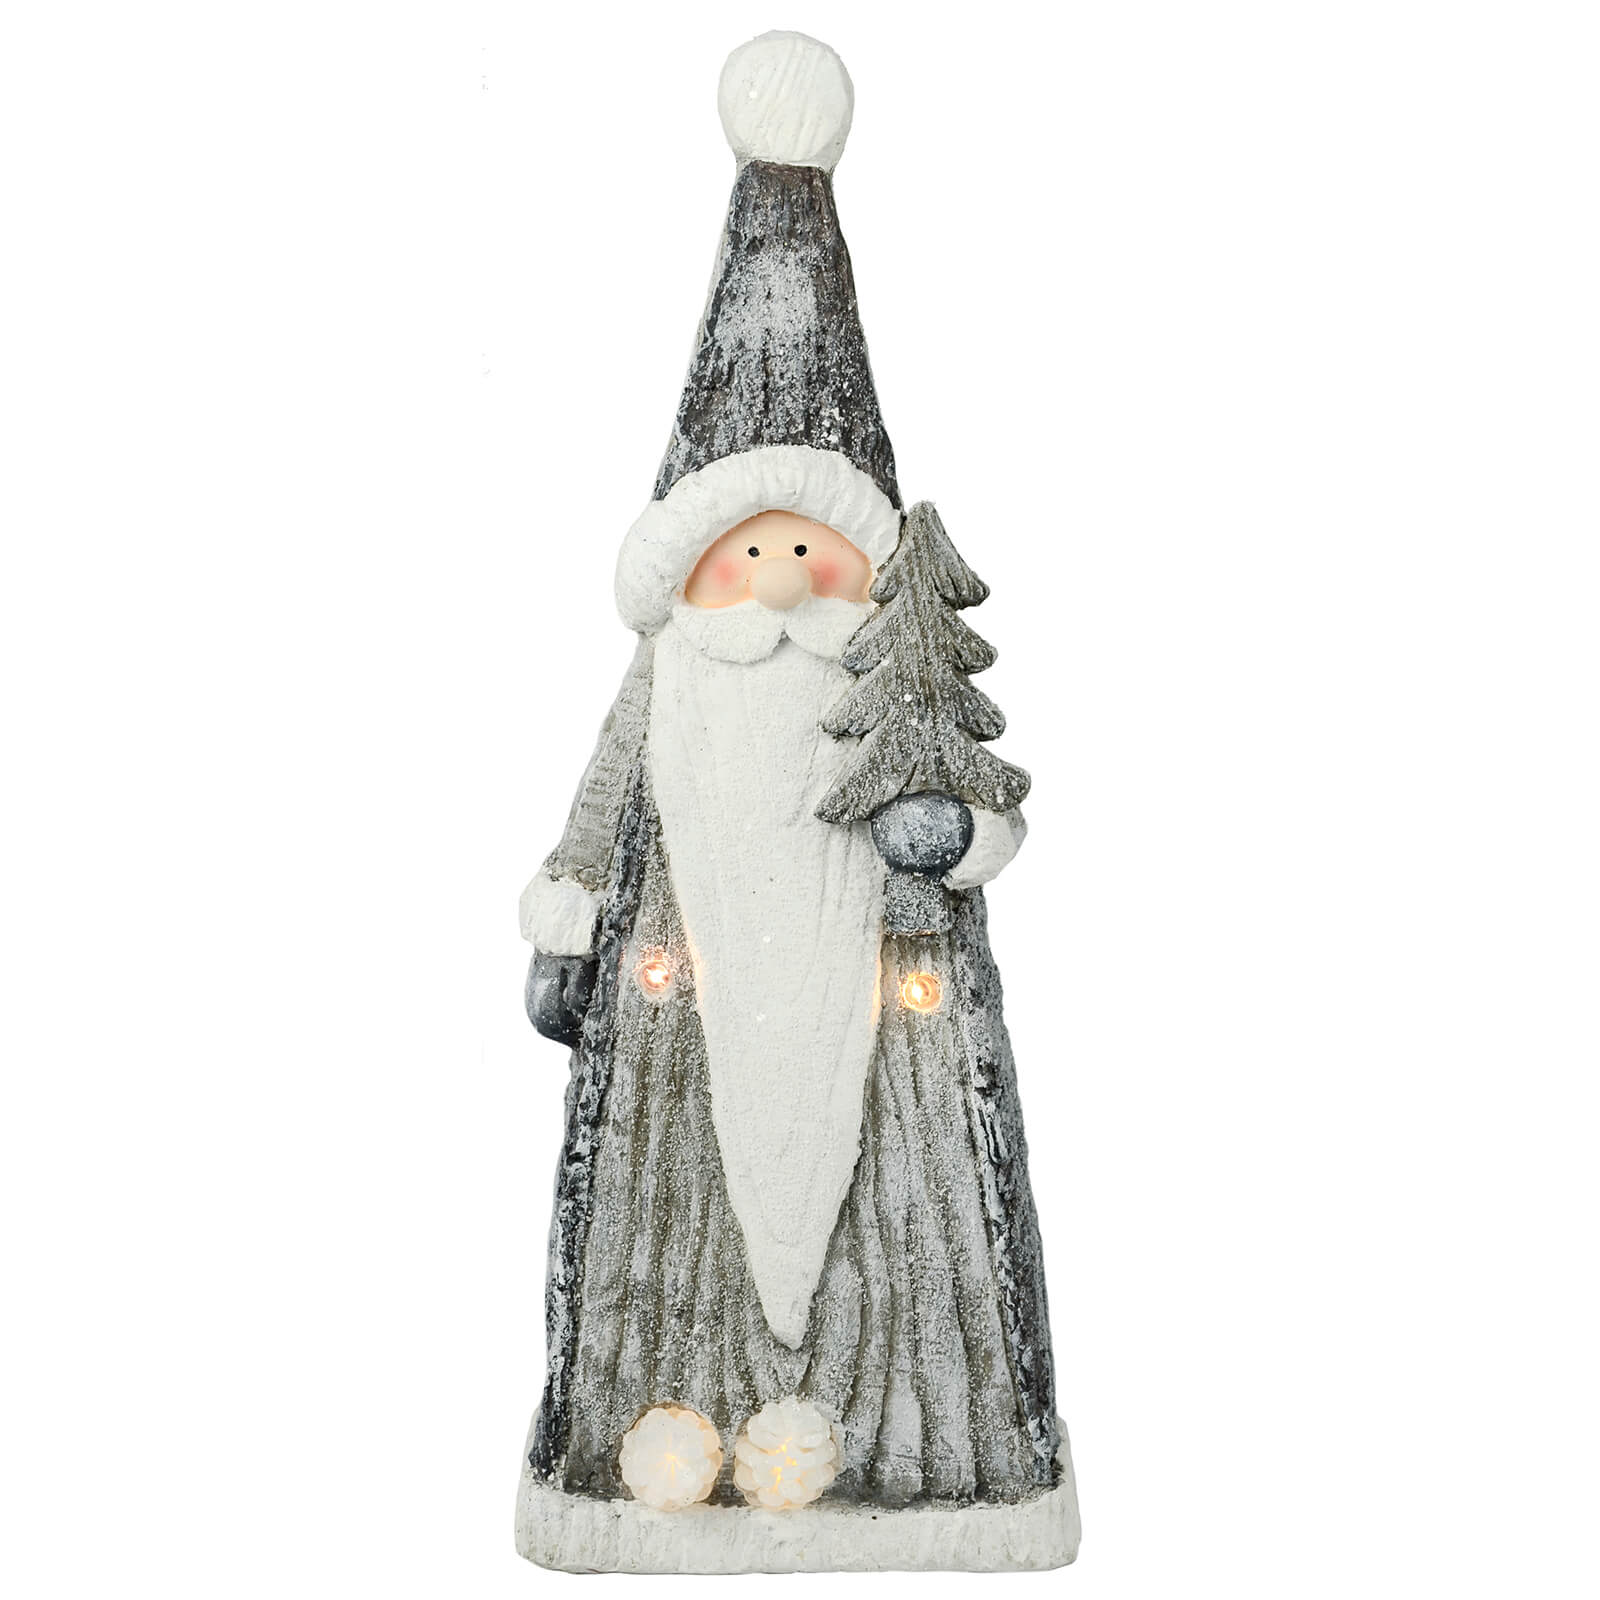 Grey and white large Santa ornament with light up pine cones, wood grain and bark effect